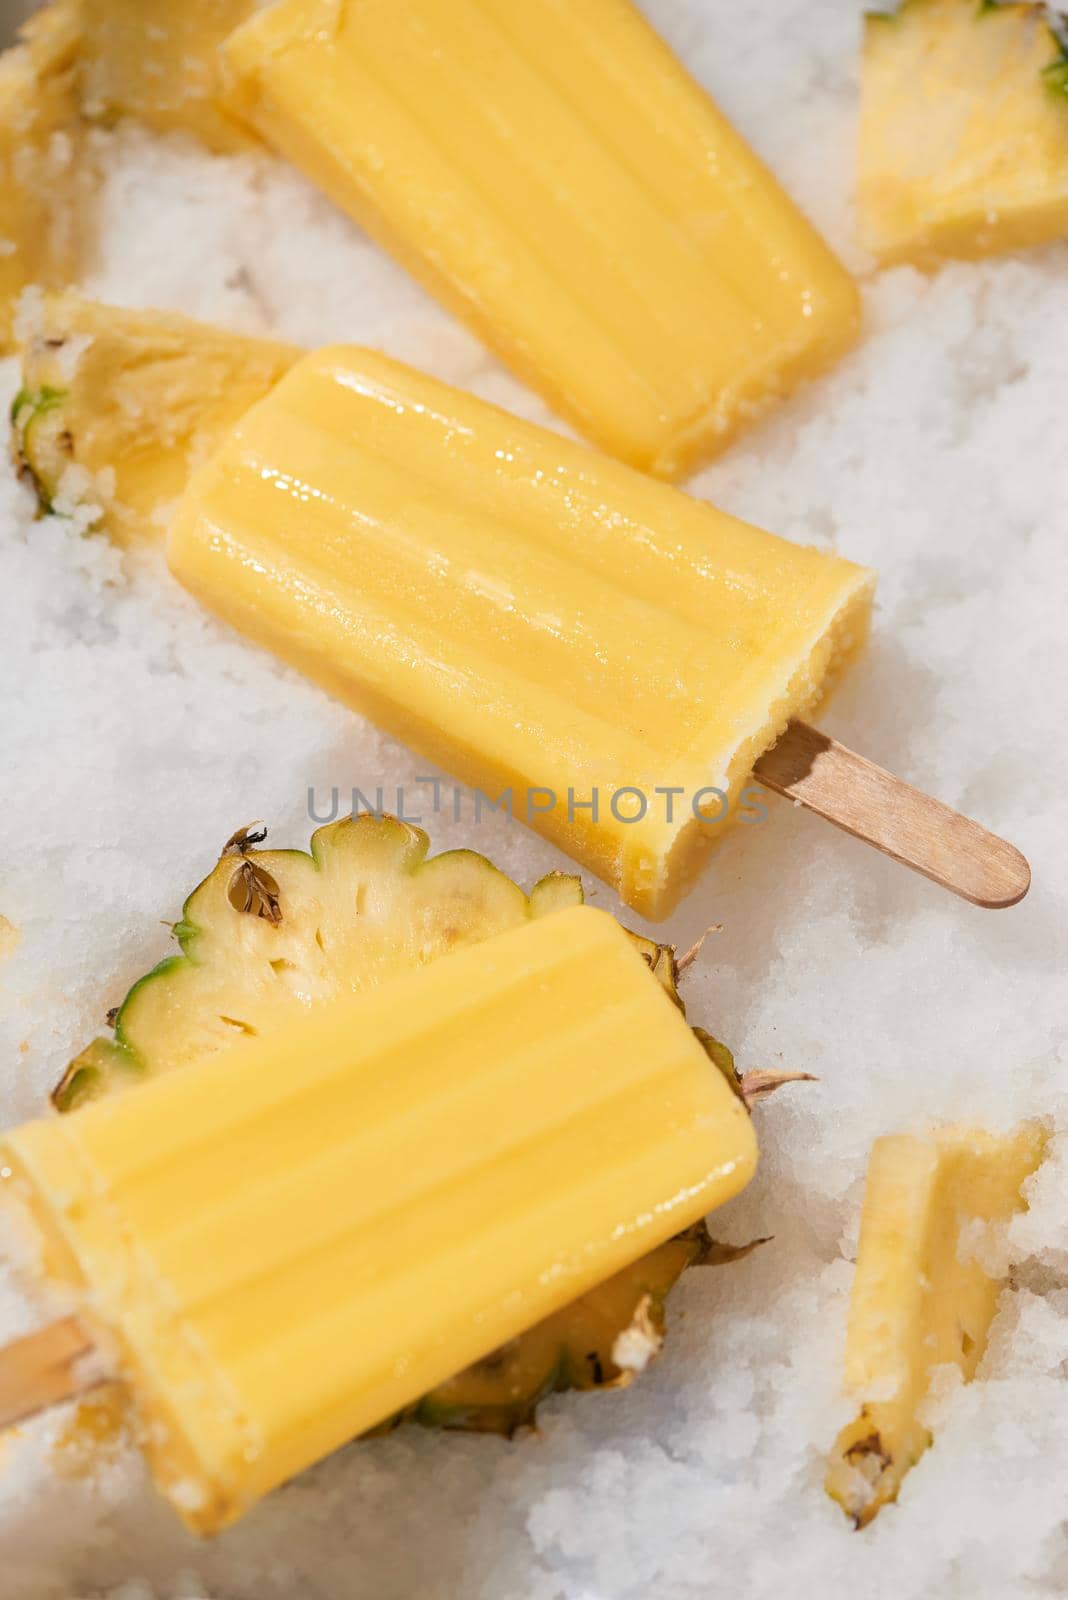 Homemade popsicles with pineapple on stick, top view